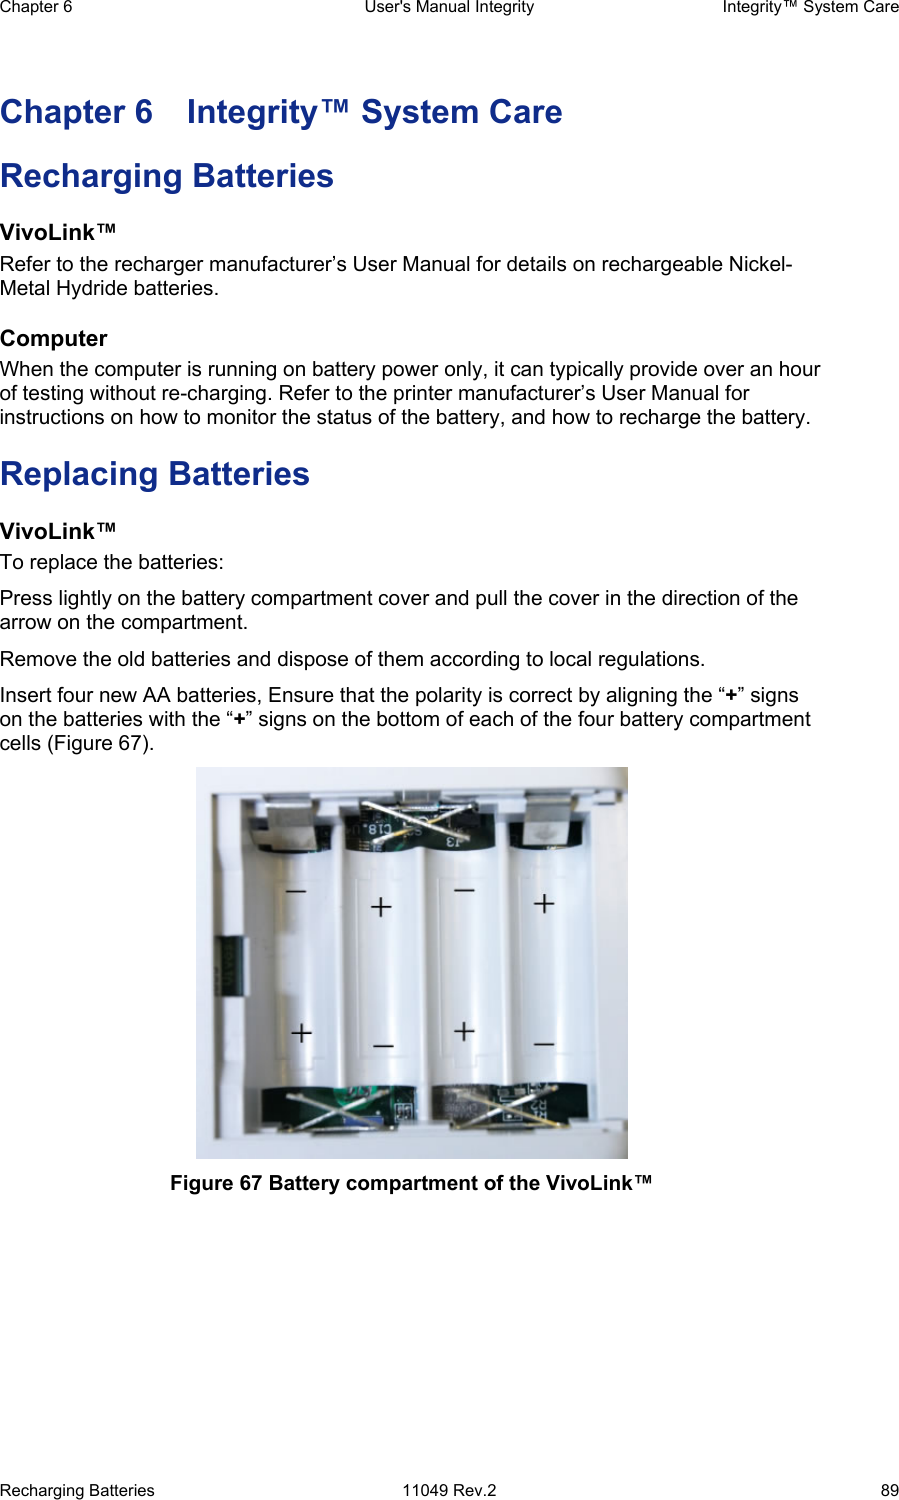 Chapter 6  User&apos;s Manual Integrity  Integrity™ System Care Recharging Batteries  11049 Rev.2  89 Chapter 6  Integrity™ System Care Recharging Batteries VivoLink™ Refer to the recharger manufacturer’s User Manual for details on rechargeable Nickel-Metal Hydride batteries. Computer When the computer is running on battery power only, it can typically provide over an hour of testing without re-charging. Refer to the printer manufacturer’s User Manual for instructions on how to monitor the status of the battery, and how to recharge the battery. Replacing Batteries VivoLink™ To replace the batteries:  Press lightly on the battery compartment cover and pull the cover in the direction of the arrow on the compartment. Remove the old batteries and dispose of them according to local regulations.  Insert four new AA batteries, Ensure that the polarity is correct by aligning the “+” signs on the batteries with the “+” signs on the bottom of each of the four battery compartment cells (Figure 67).  Figure 67 Battery compartment of the VivoLink™ 